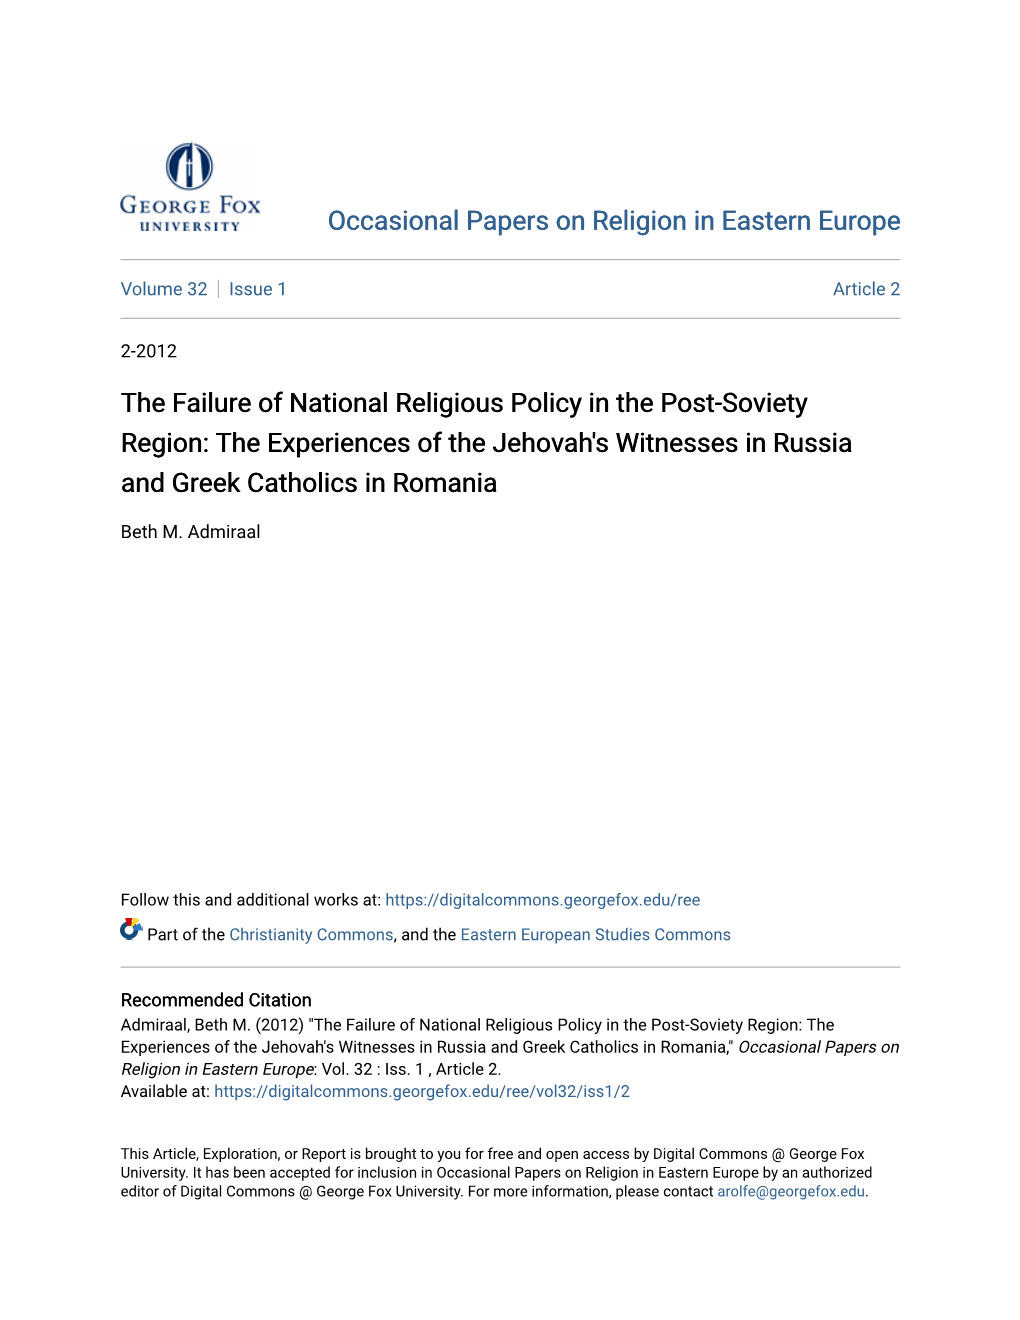 The Failure of National Religious Policy in the Post-Soviety Region: the Experiences of the Jehovah's Witnesses in Russia and Greek Catholics in Romania